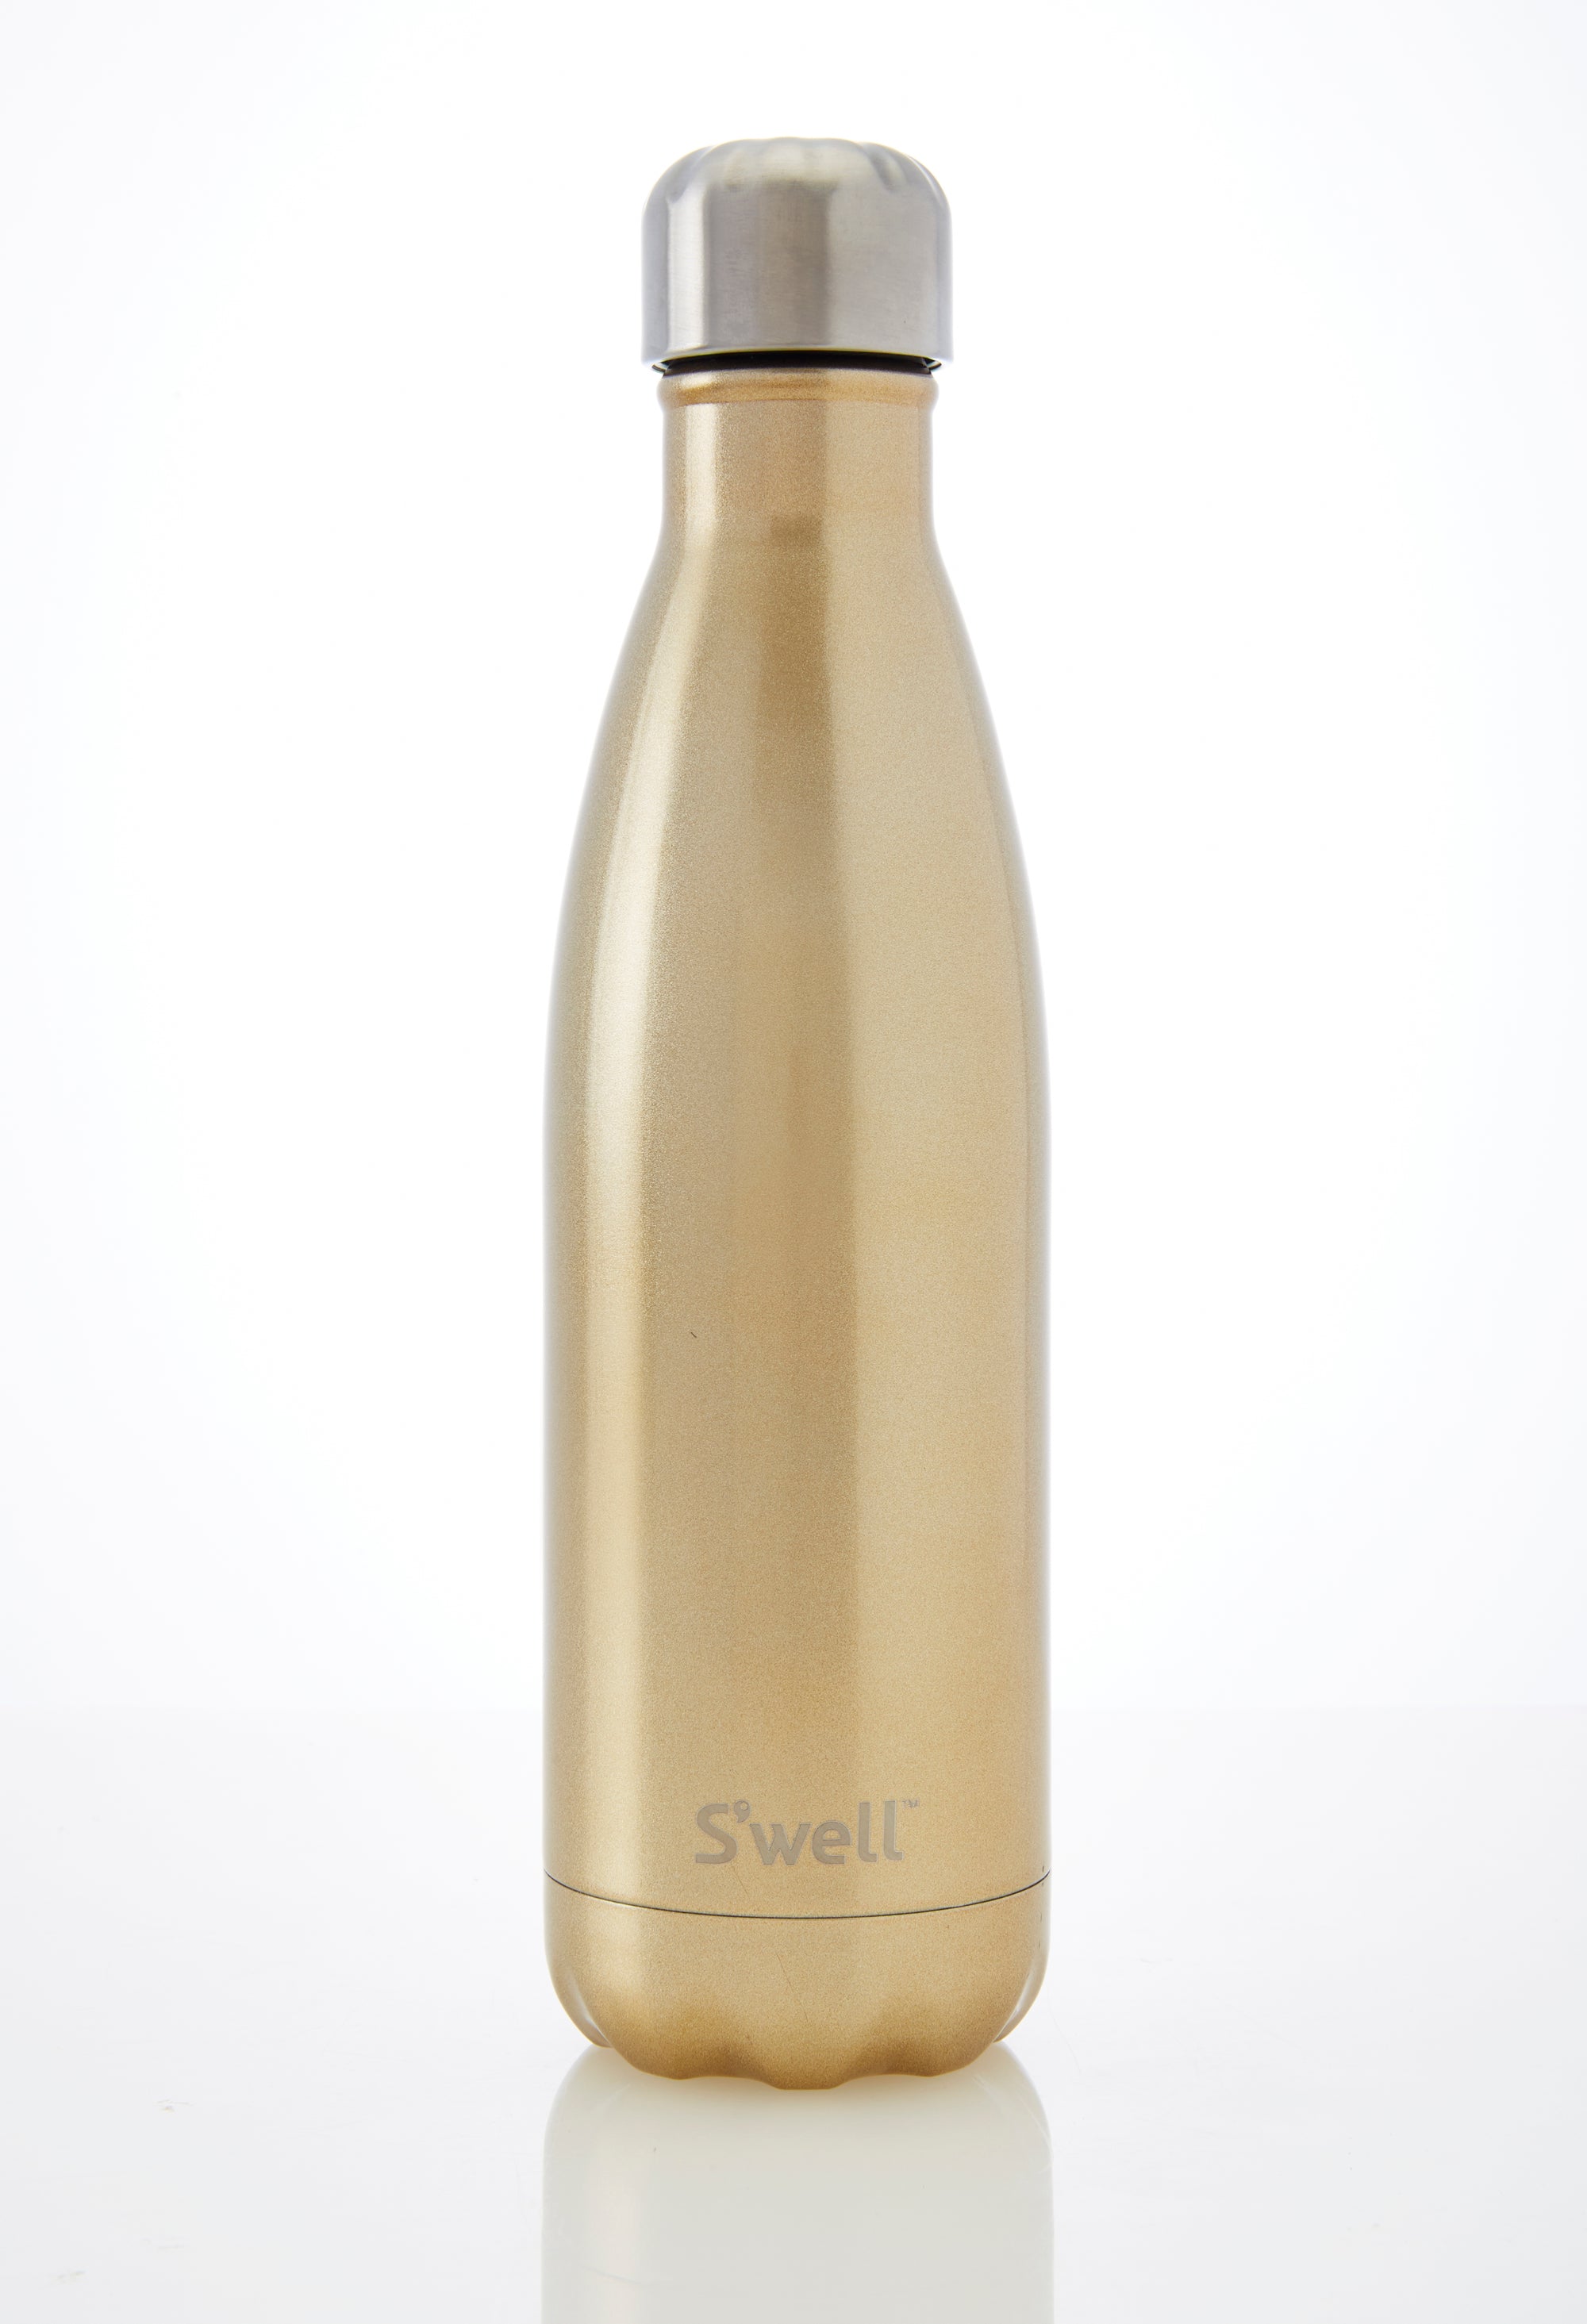 S'well Drink Bottle - Sparkling Champagne 500ml & 750ml